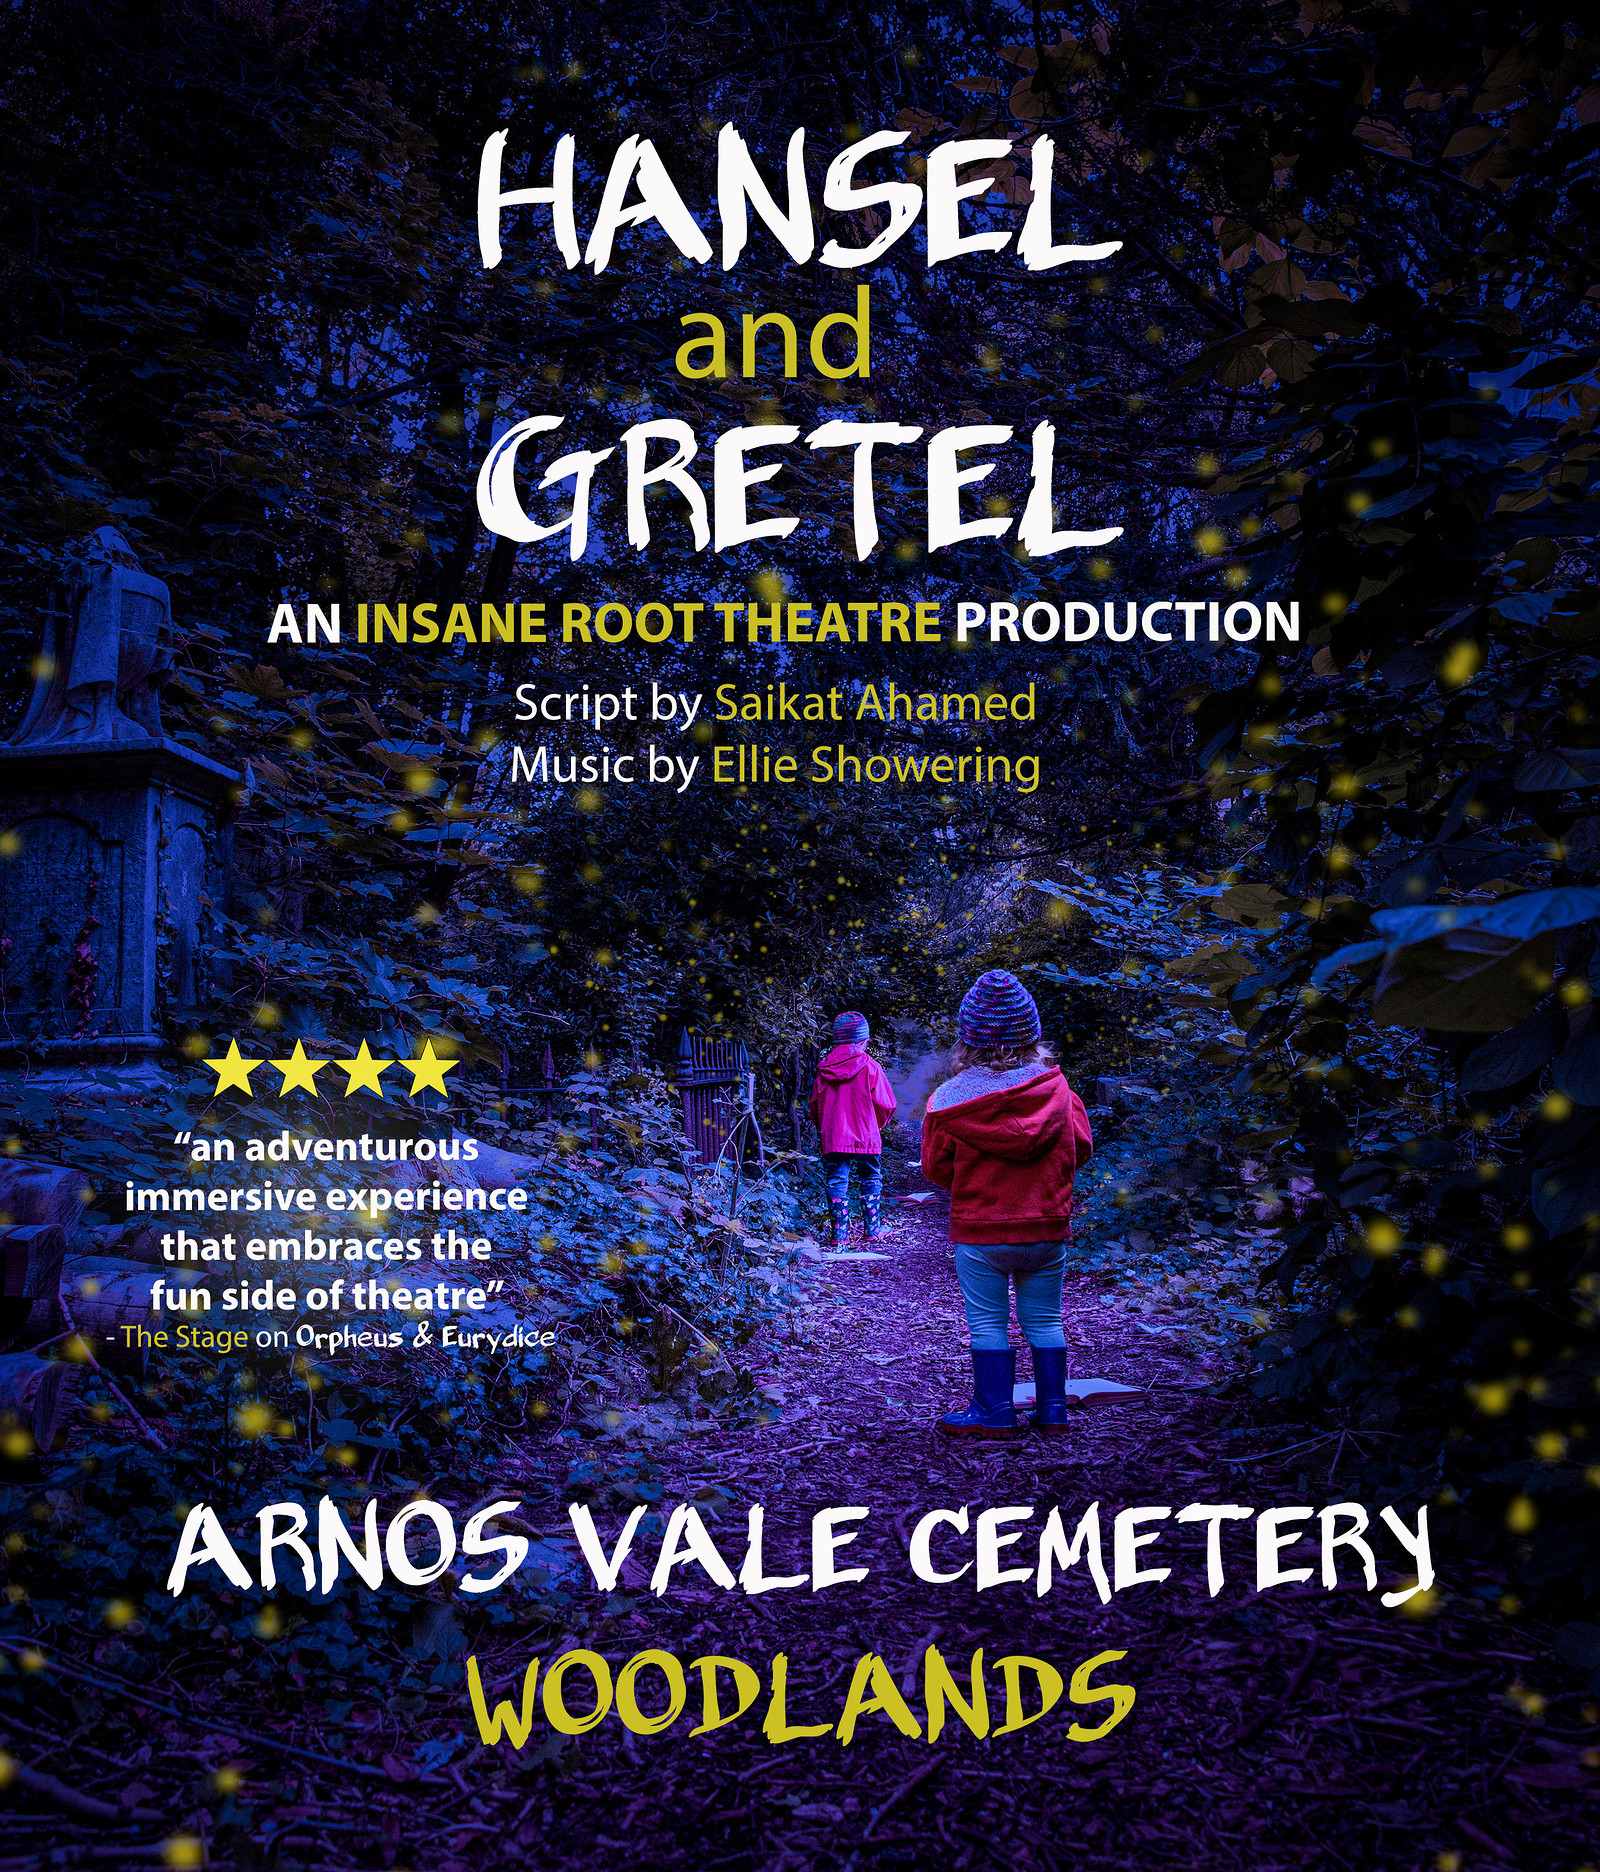 Hansel and Gretel at Arnos Vale Cemetery